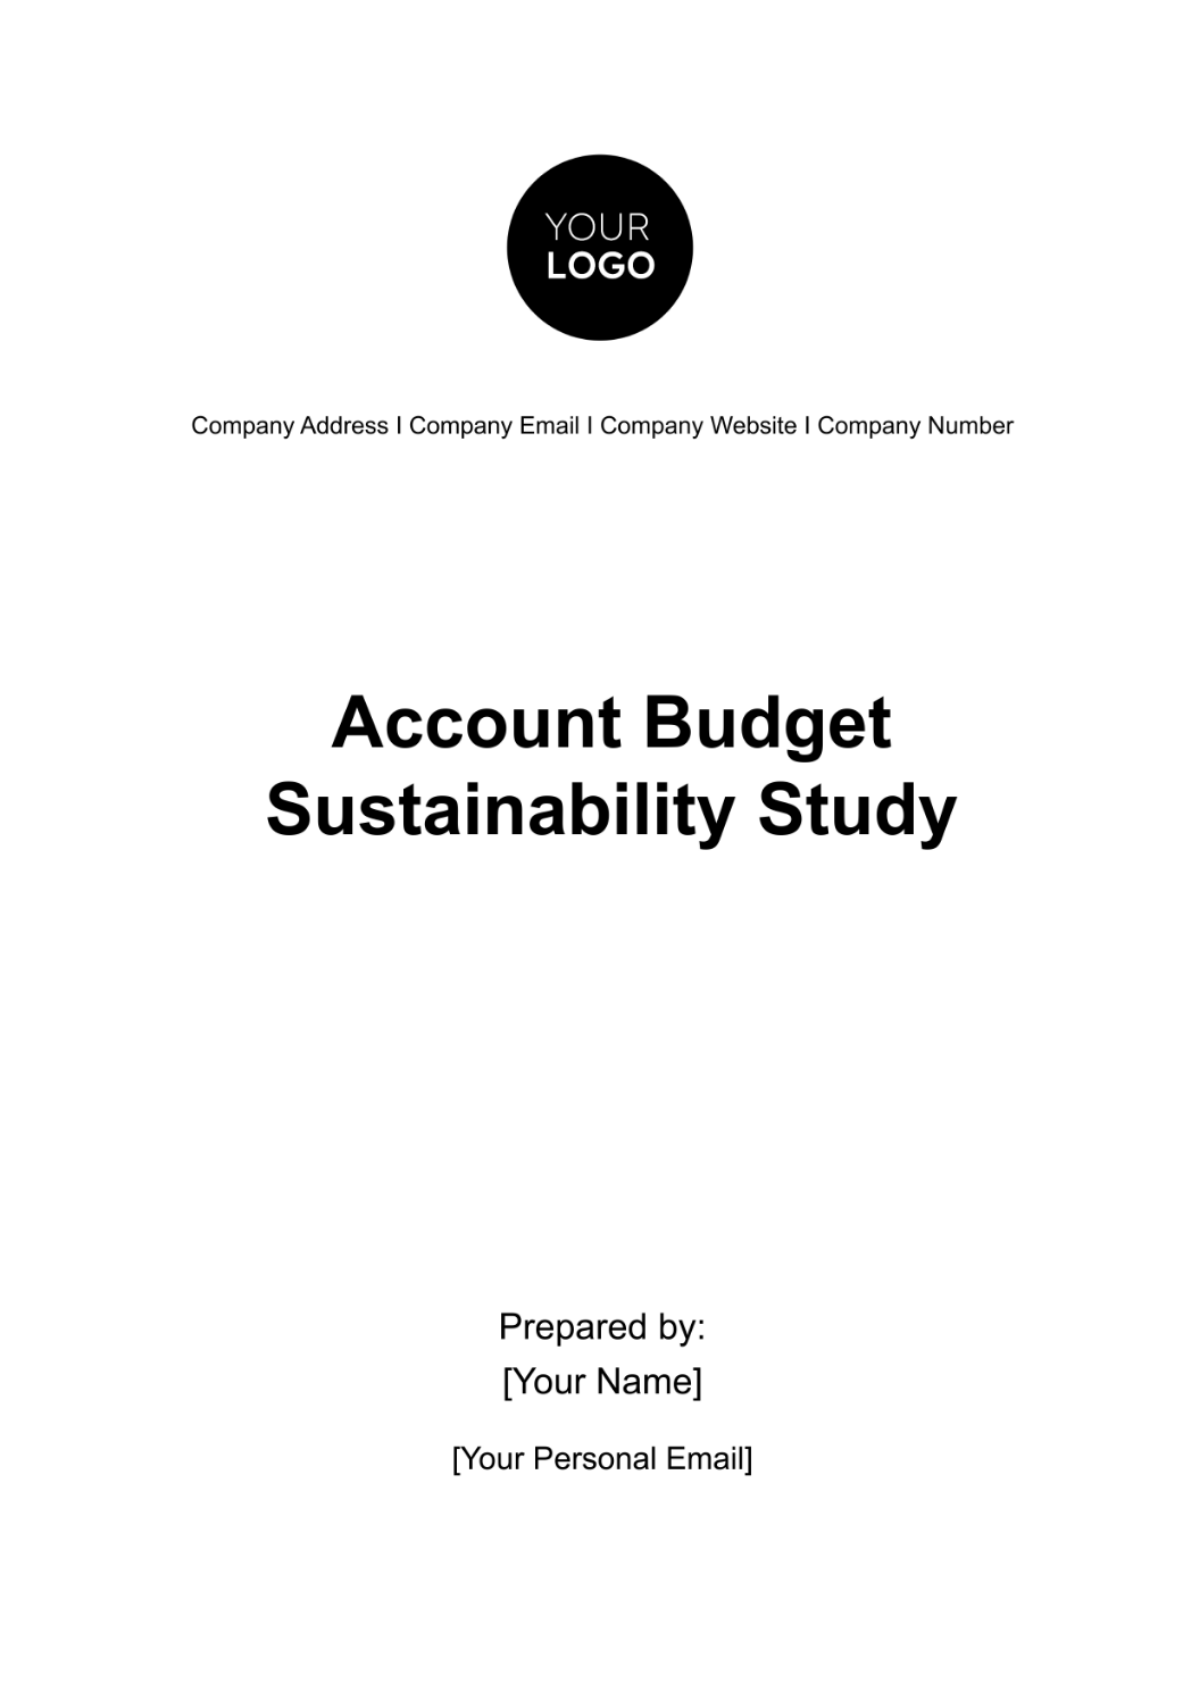 Account Budget Sustainability Study Template